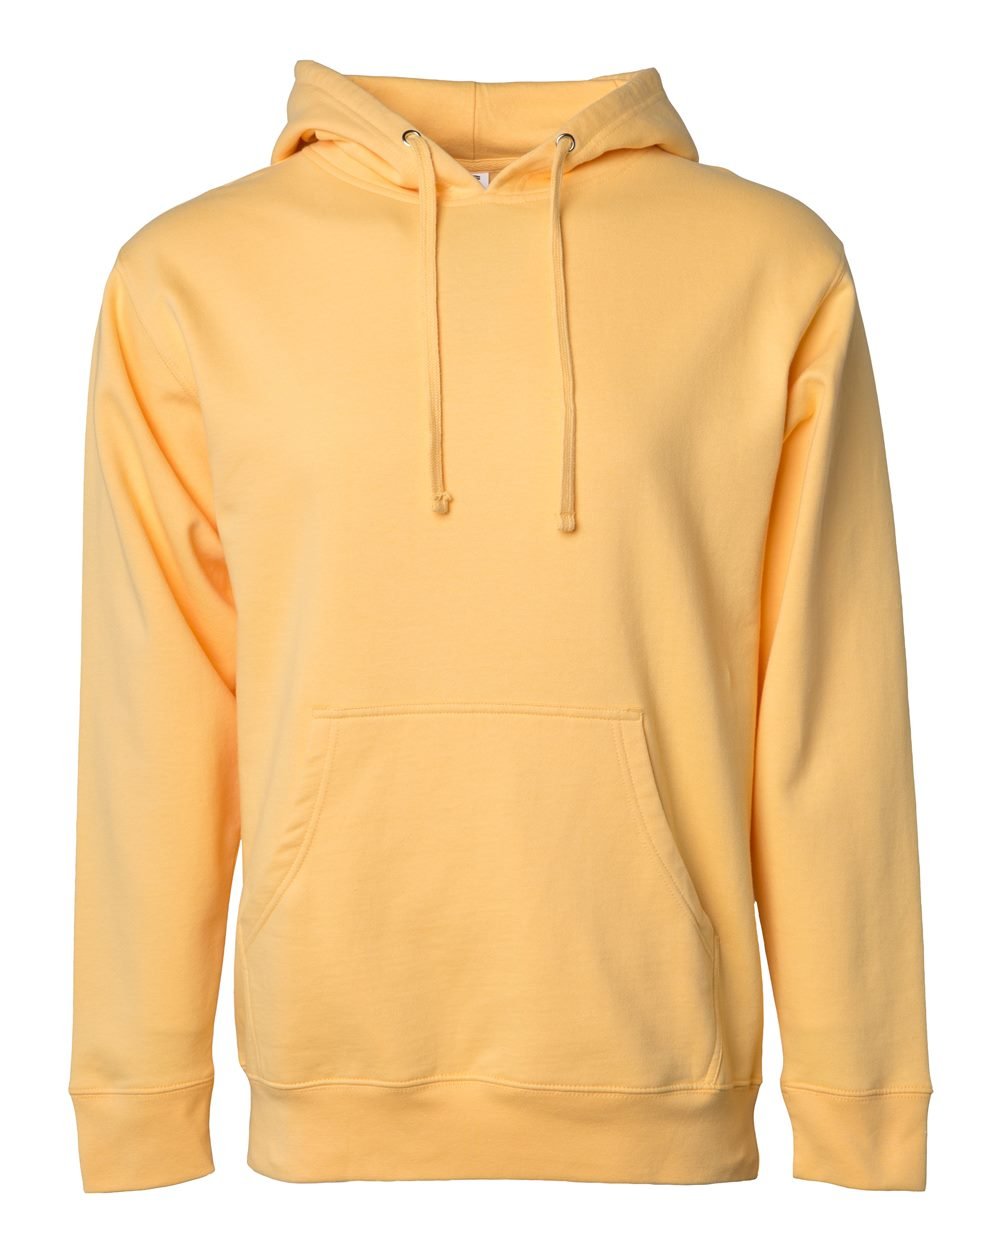 Three Color Independent Trading Co Hoodie - Low Road Merch